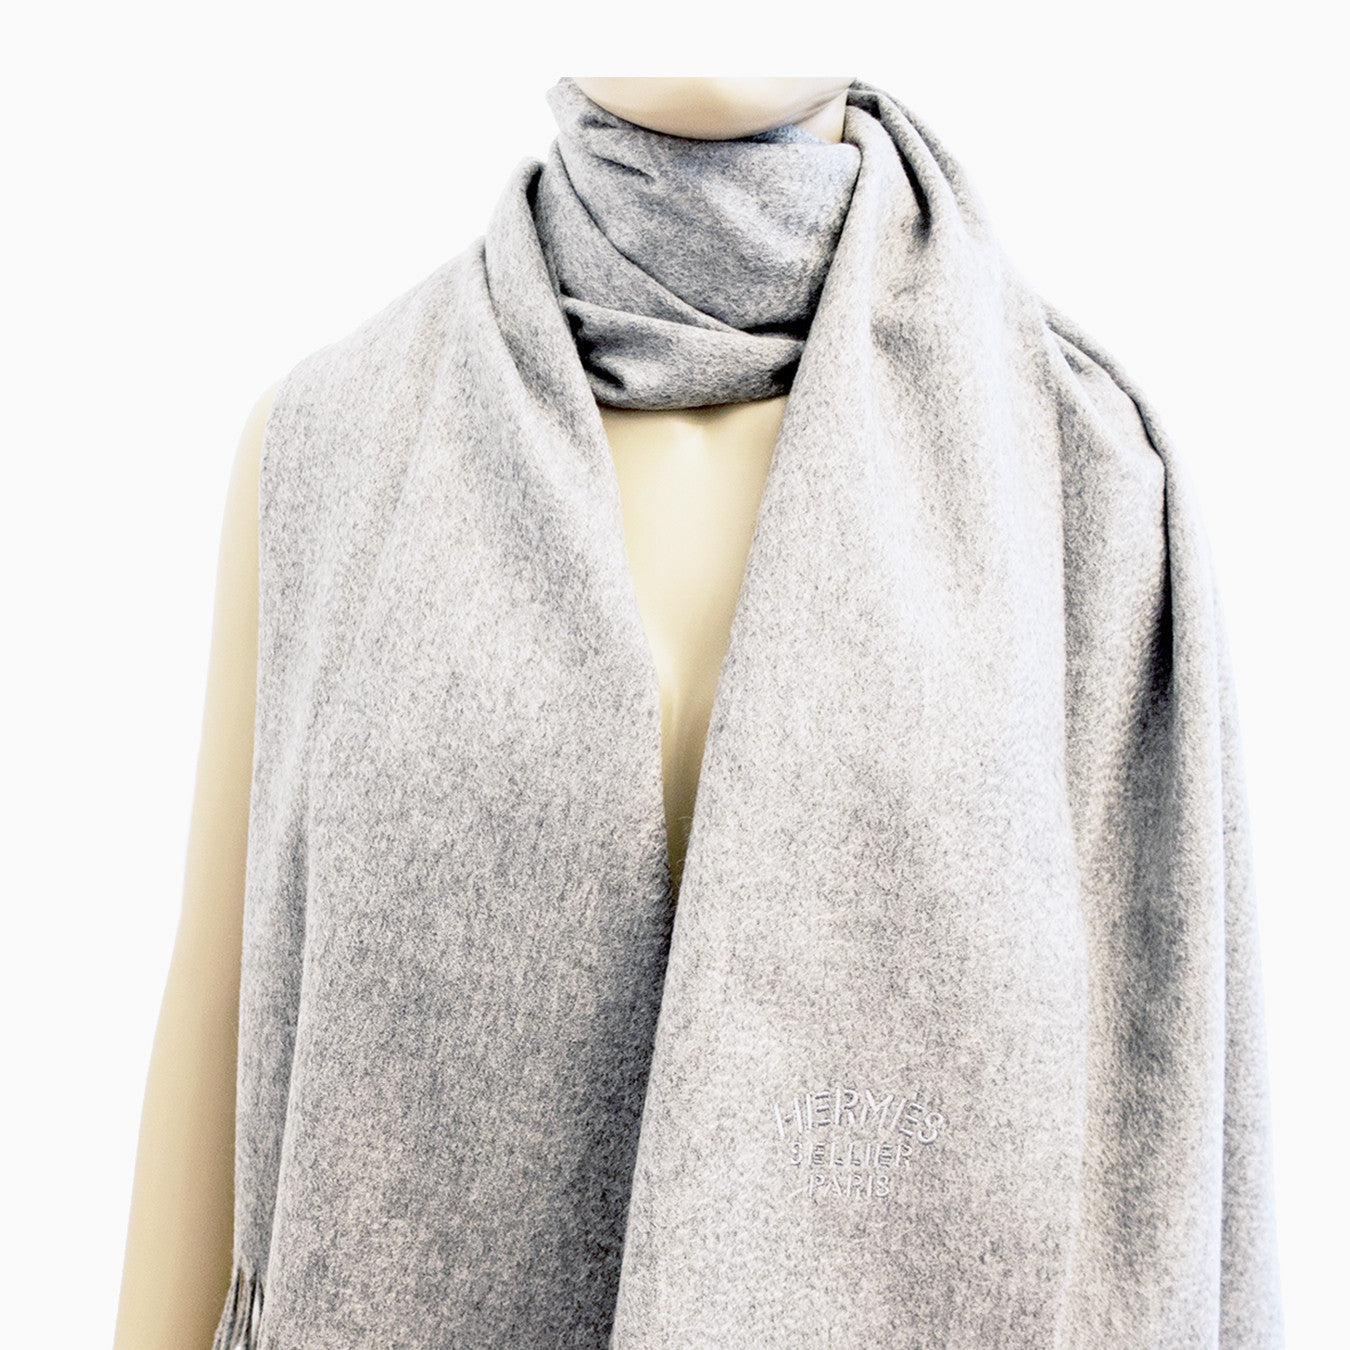 Hermes Light Grey Double Faced Unisex Cashmere Scarf Stole - Chicjoy